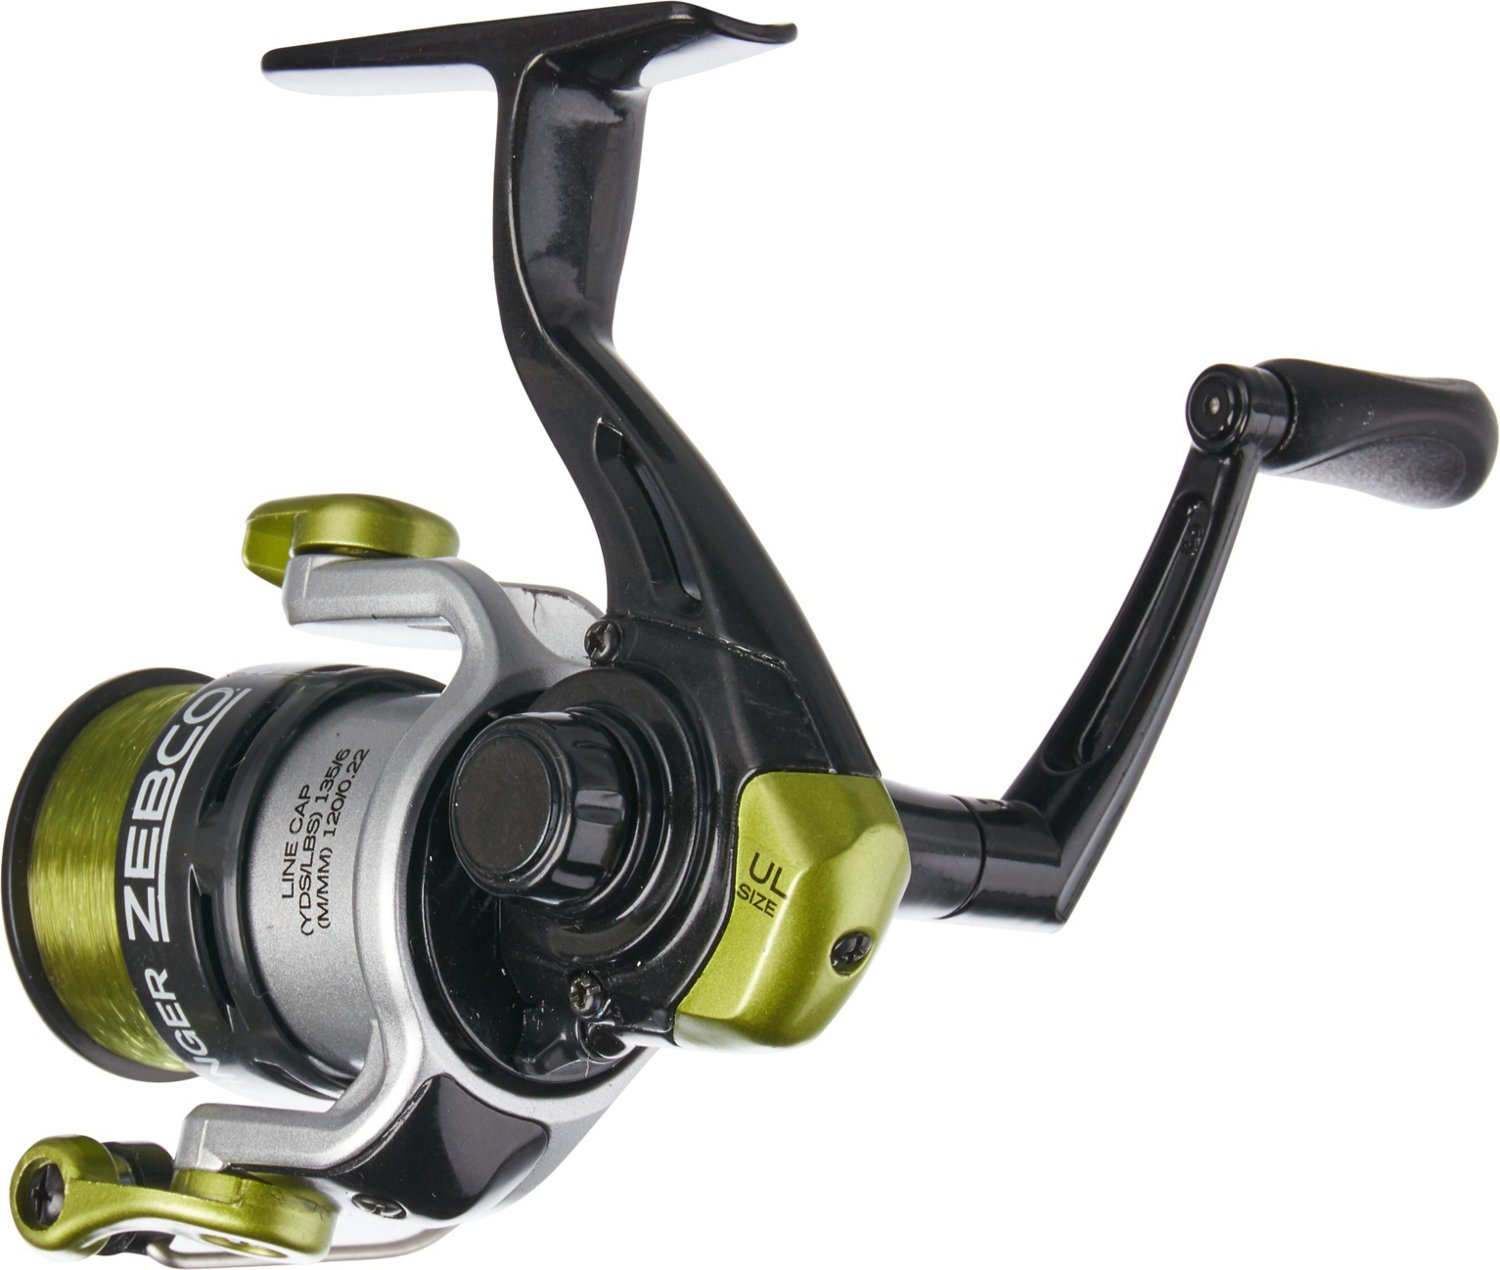 Zebco Stinger Spin Cast Reel Combo, 30sz And 702m, Freshwater Rods & Reels, Sports & Outdoors